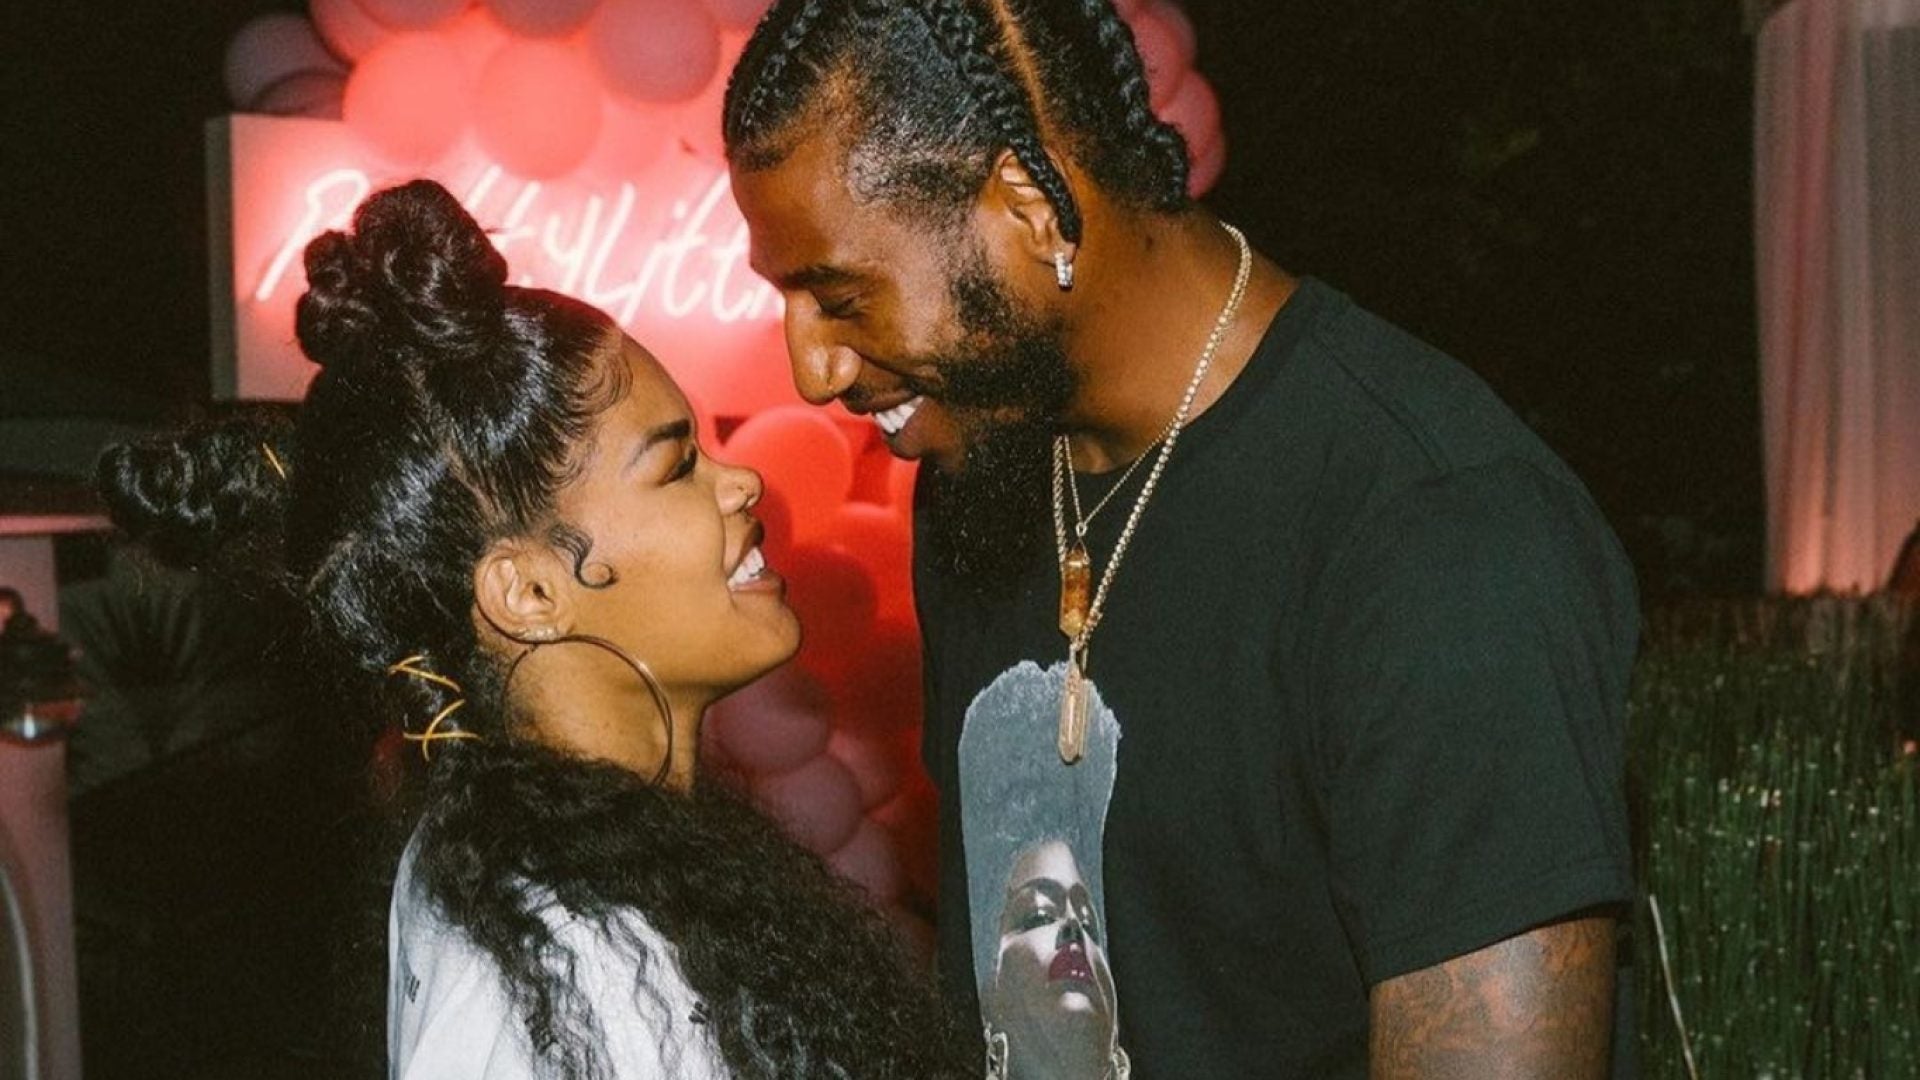 15 Of The Cutest Photos Of Teyana Taylor And Iman Shumpert As They Celebrate Their Fifth Anniversary